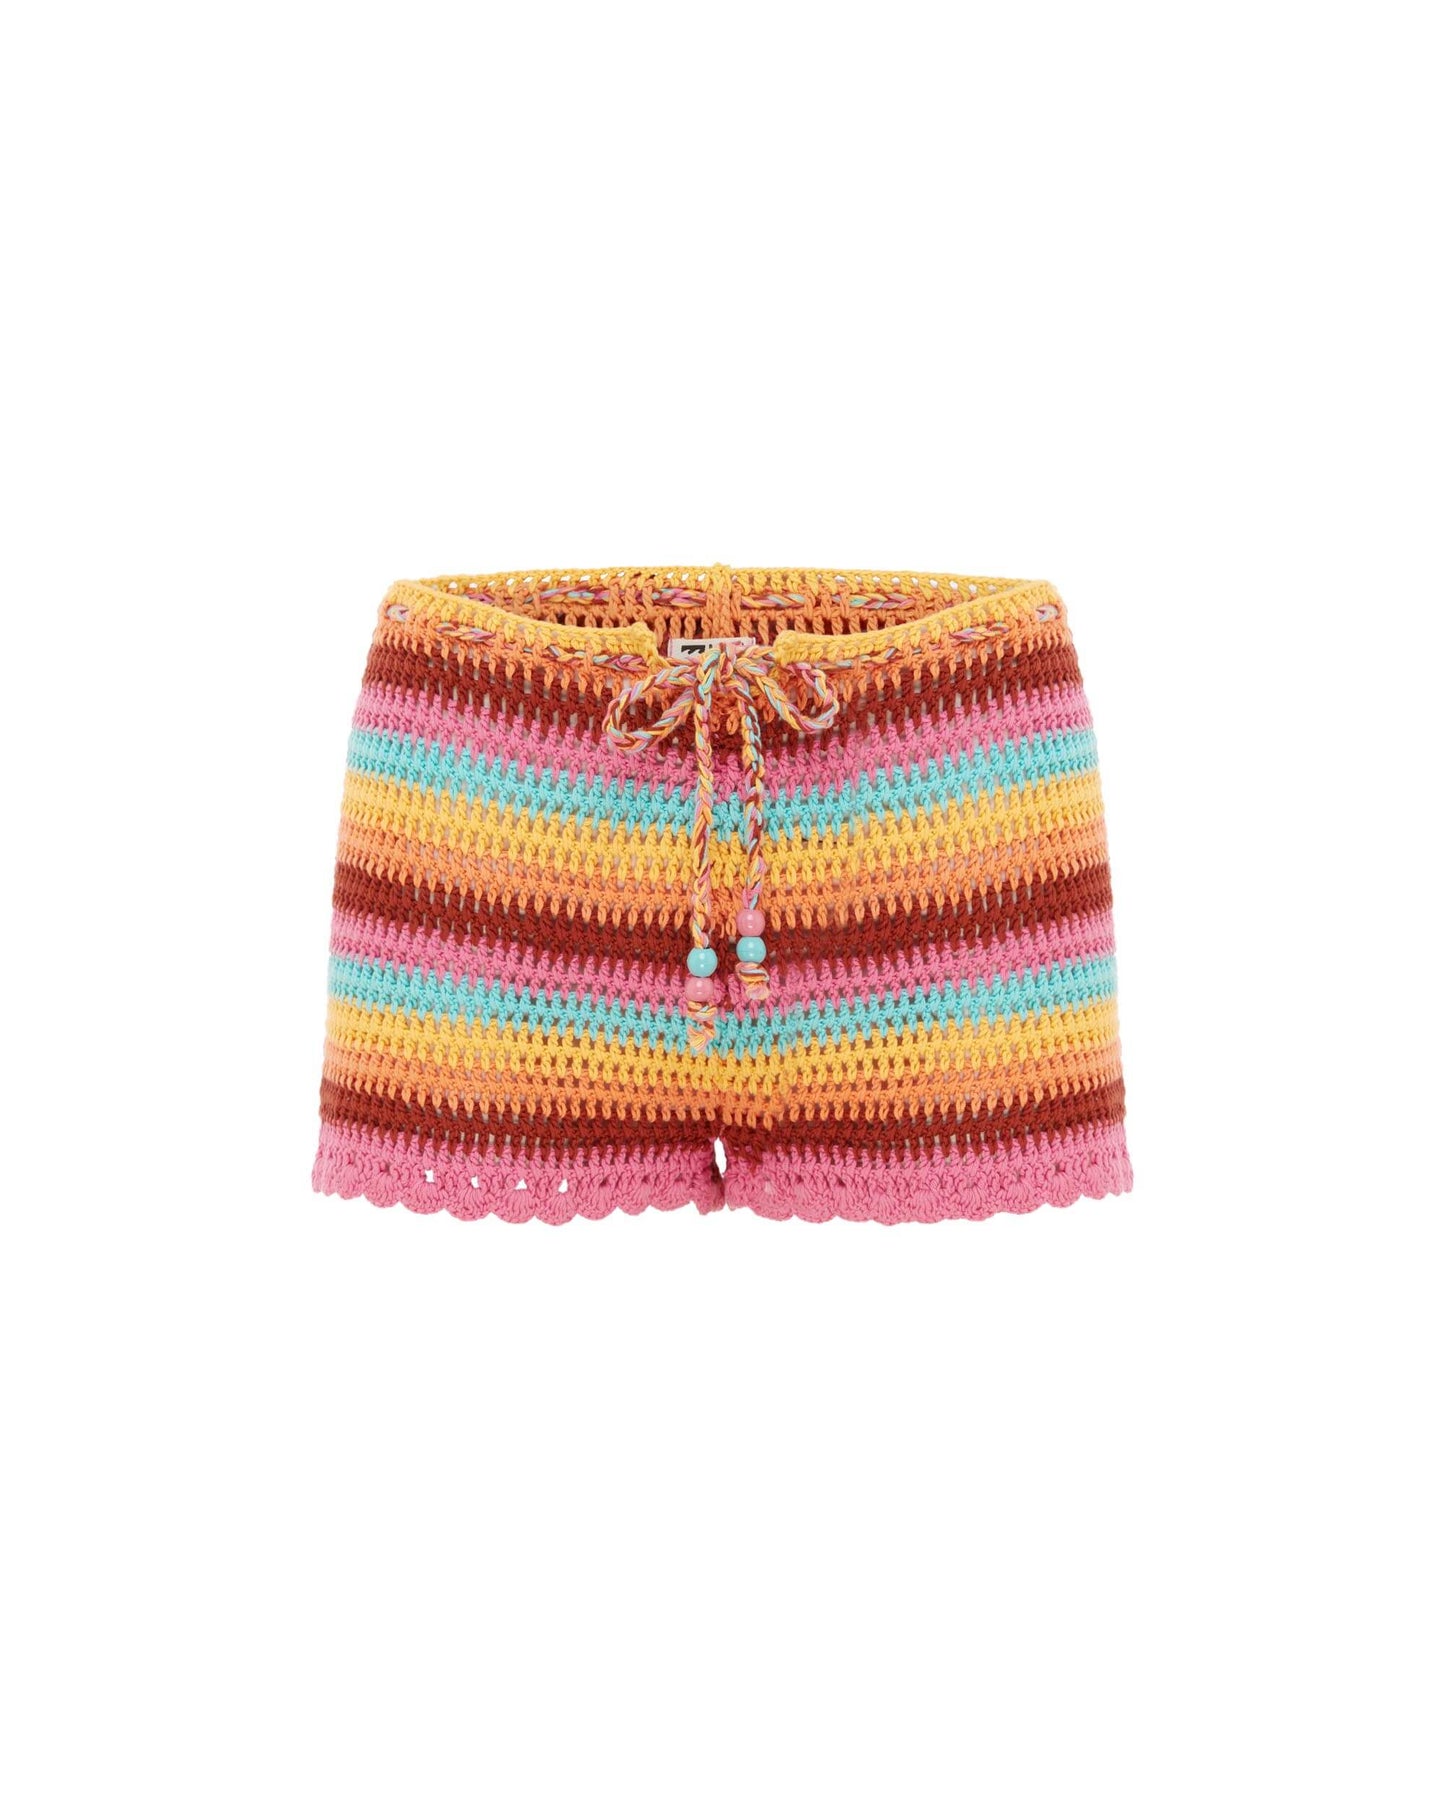 Its now cool BOARDSHORTS SIESTA SHORT - MULTI COLOUR in Multi Colour